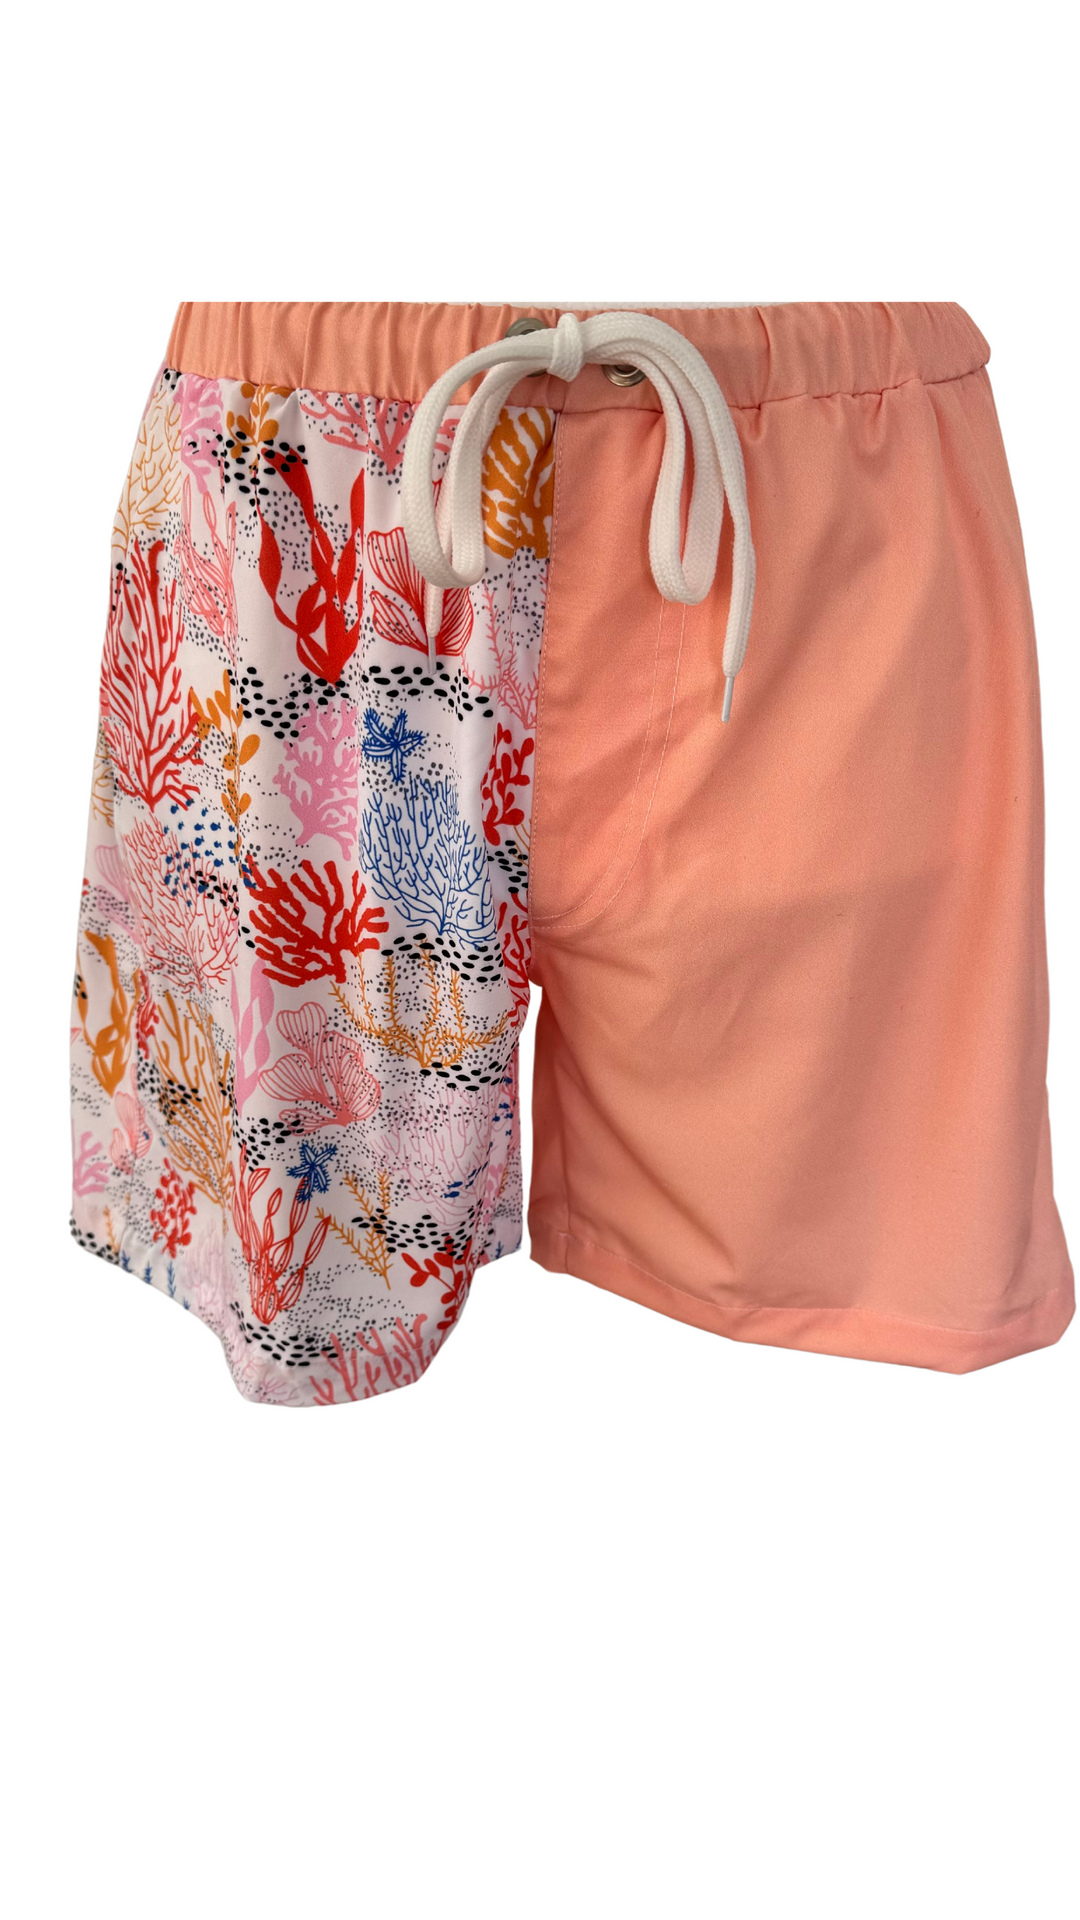 Coral Reef Swim Shorts - Bed of Nails